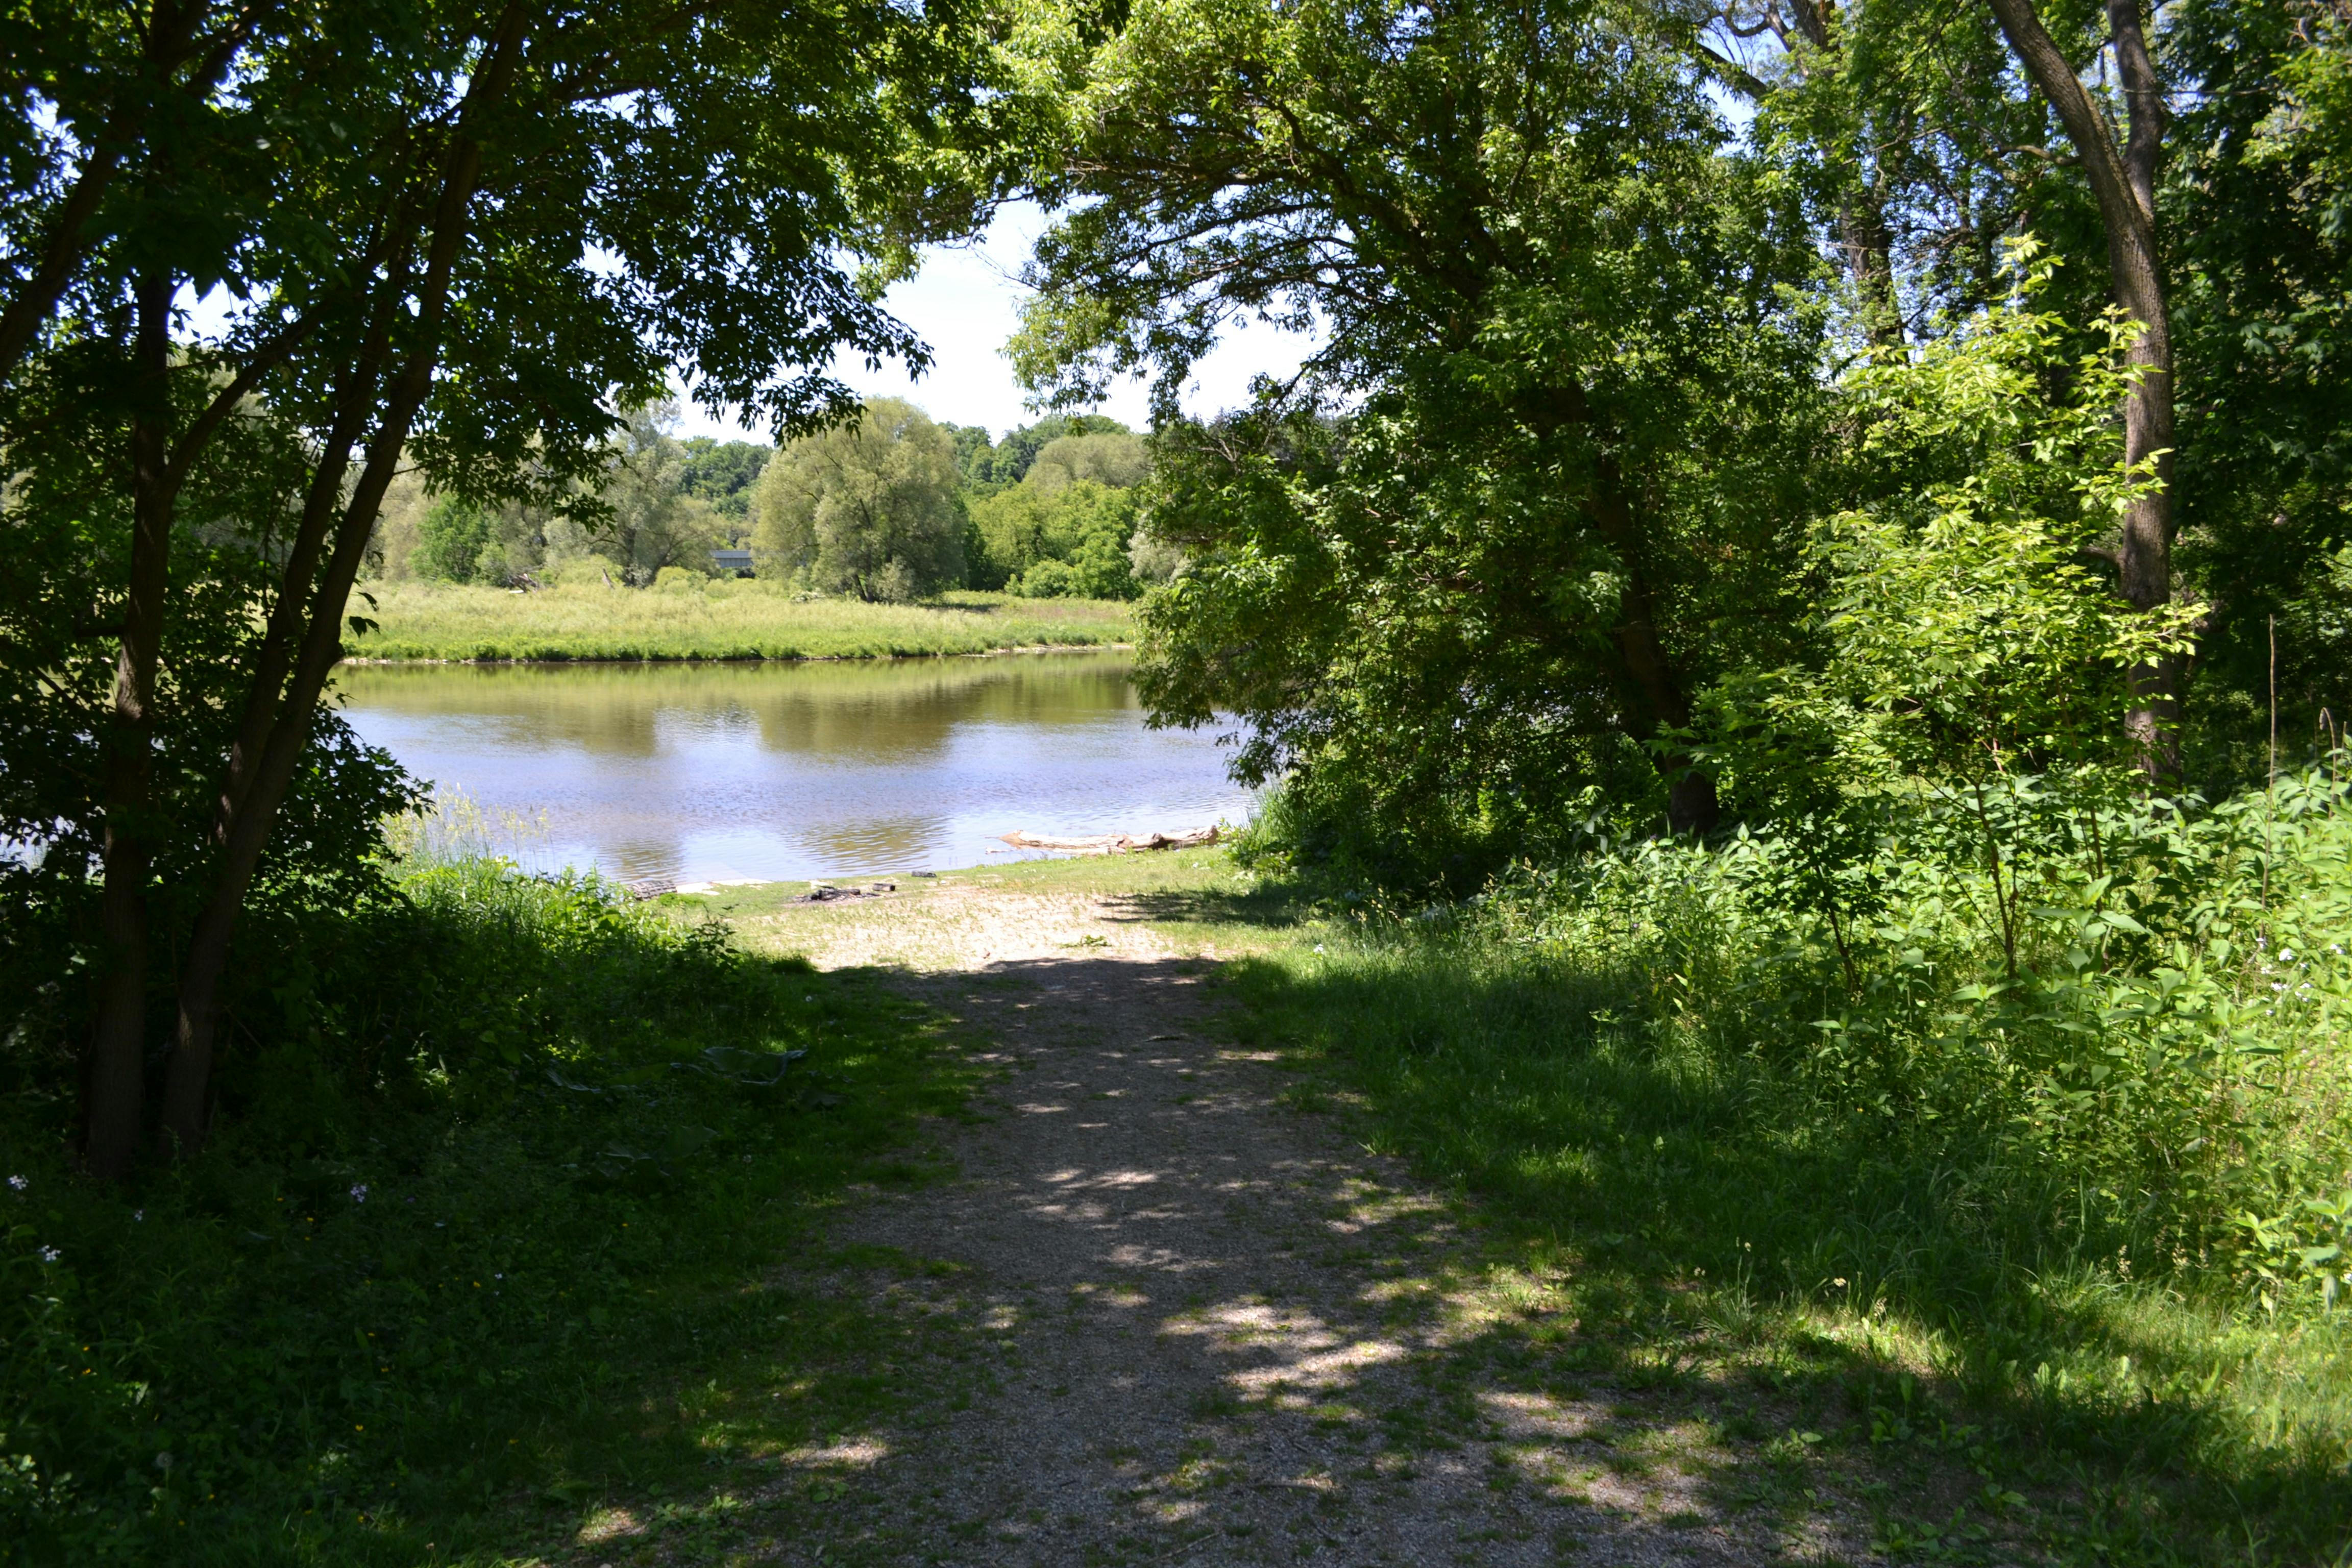 Path to the boat launch